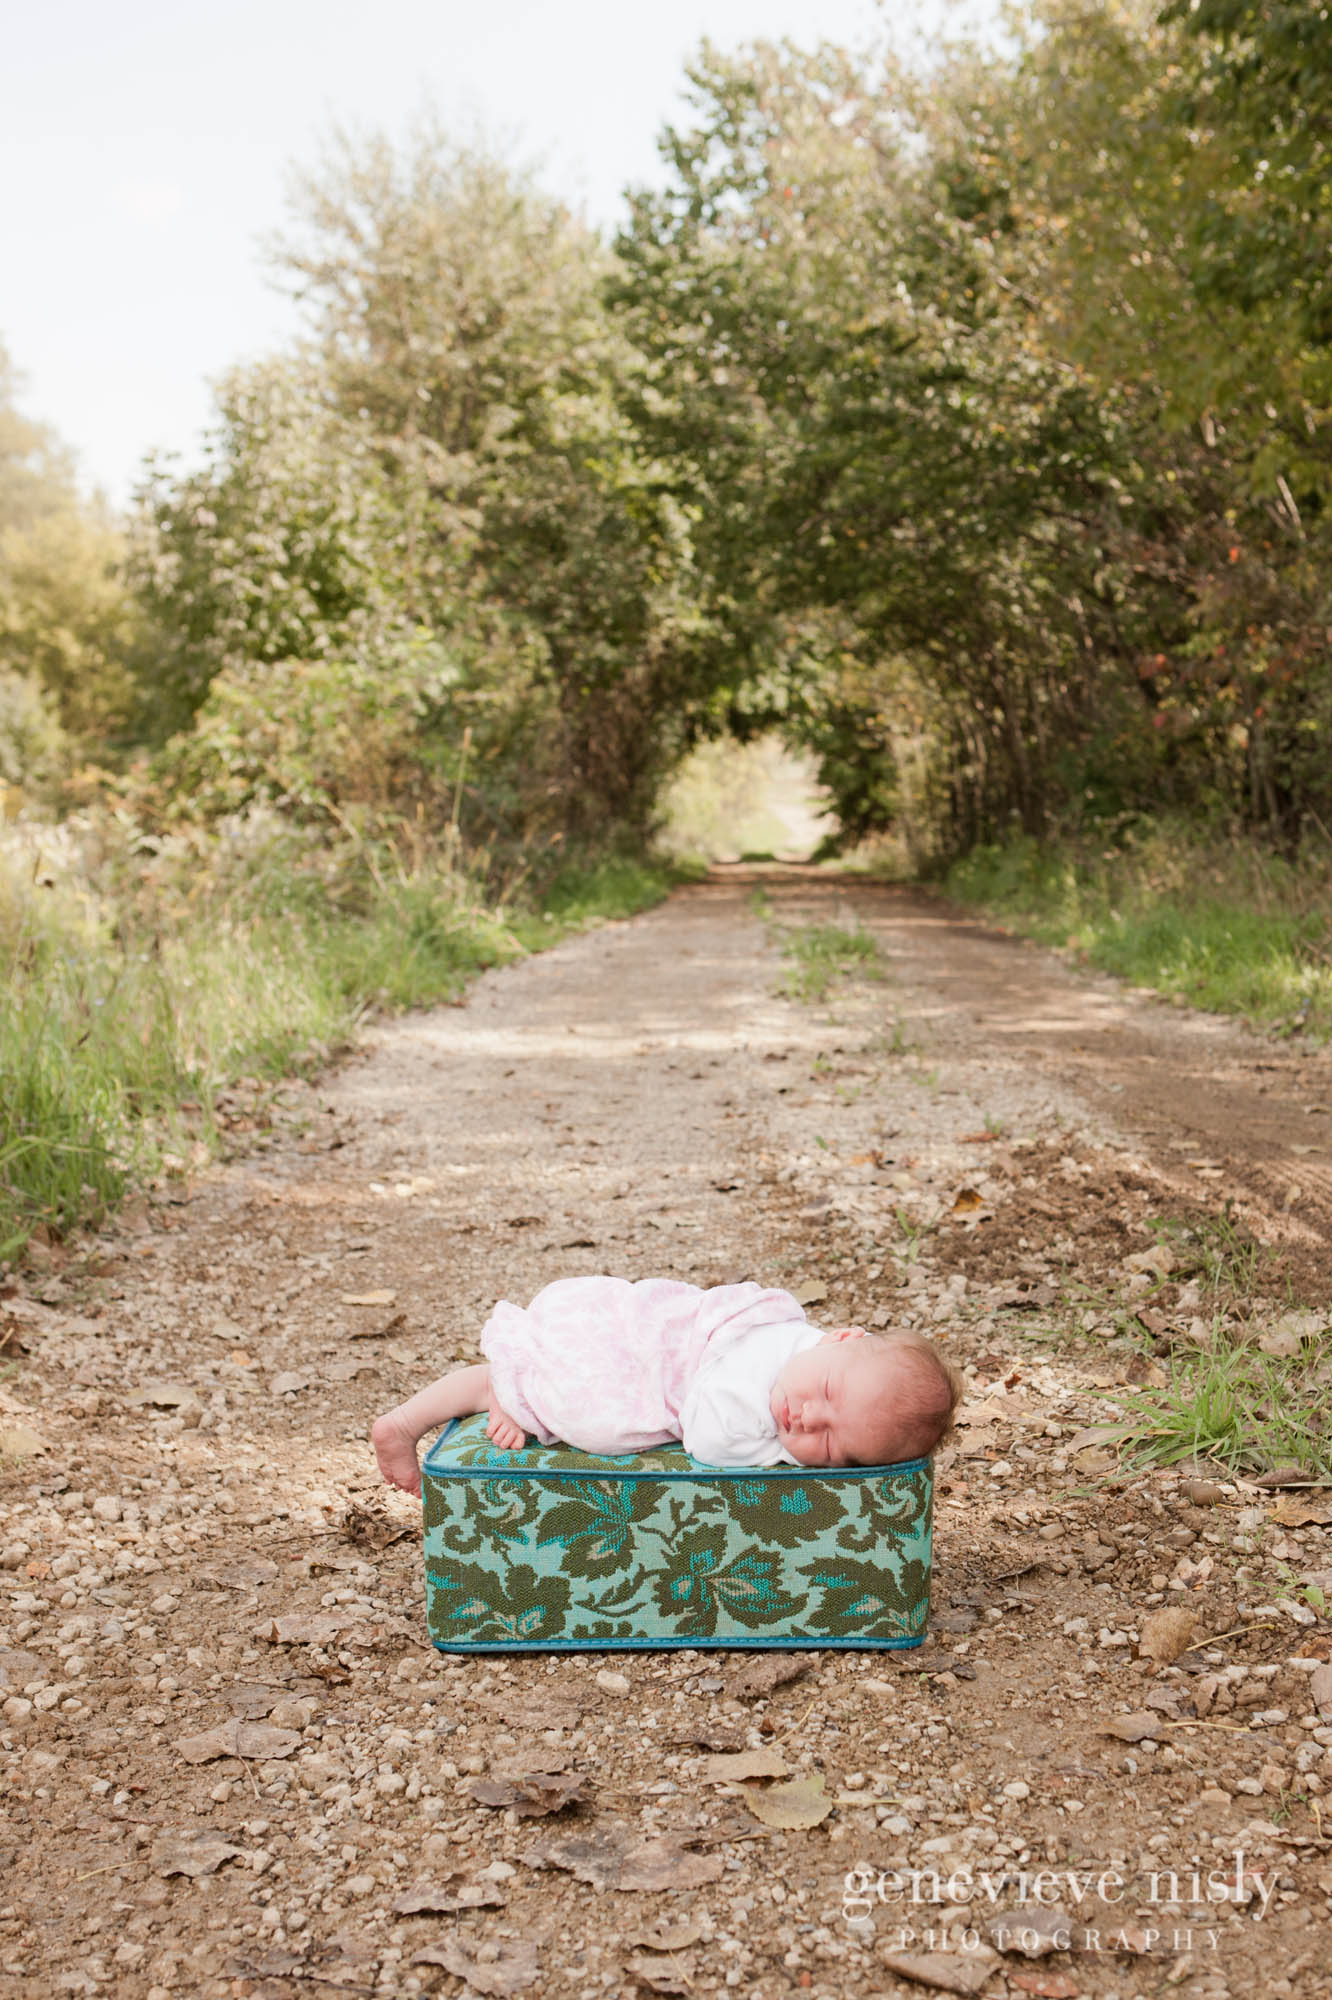  Baby, Copyright Genevieve Nisly Photography, Portraits, Summer